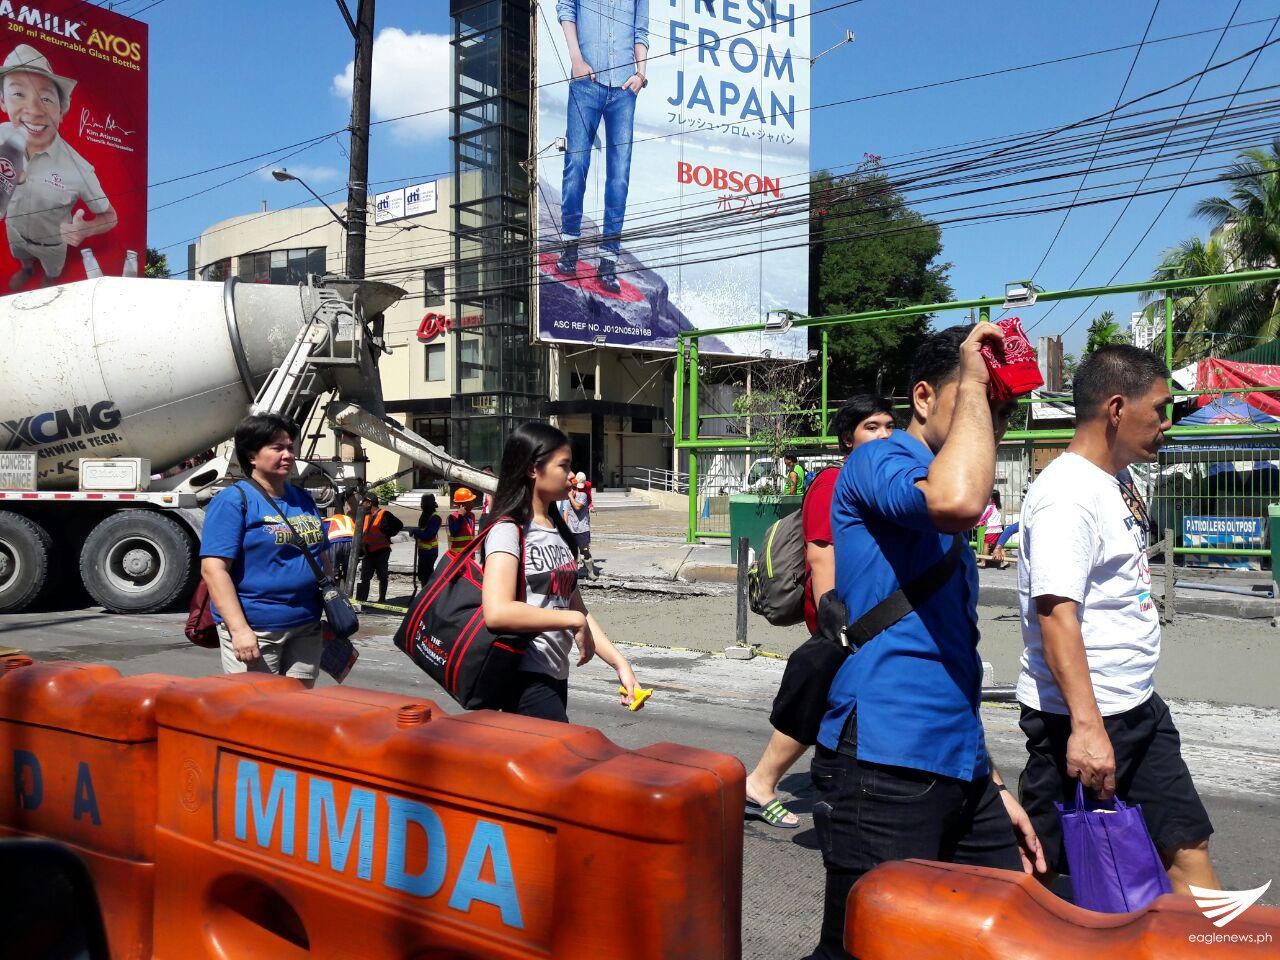 Due to the road closure, commuters were forced to walk from Edsa Crossing (Shaw) to Megamall where they could hail public utility vehicles. Erwin Temperante, Eagle News Service